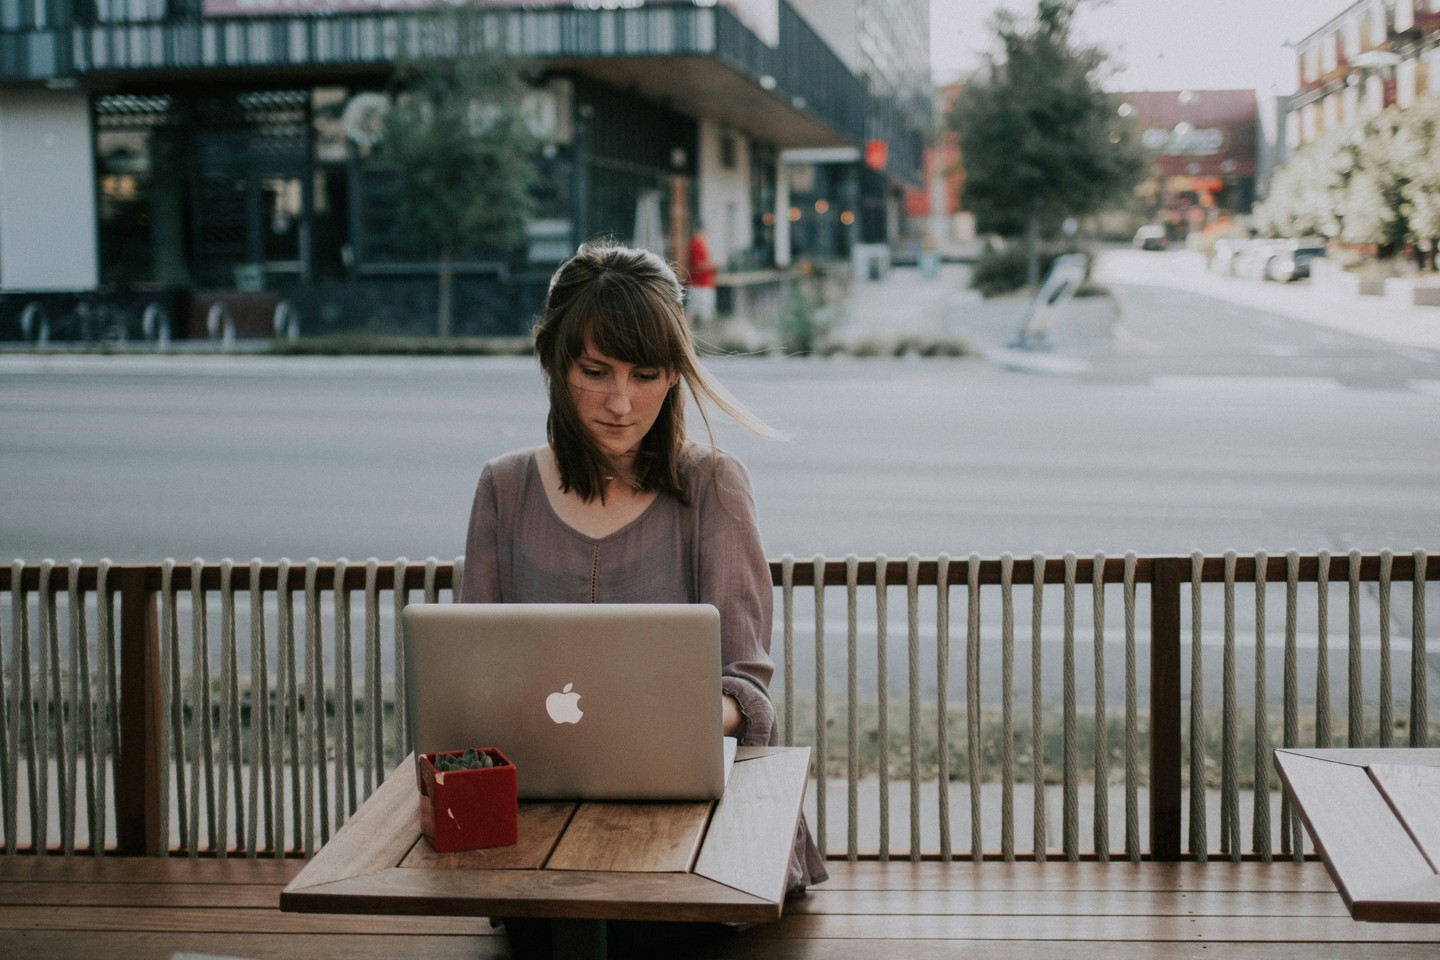 woman_in_gray_shirt_sitting_on_bench_in_front_of_macbook - ©christinhumephoto